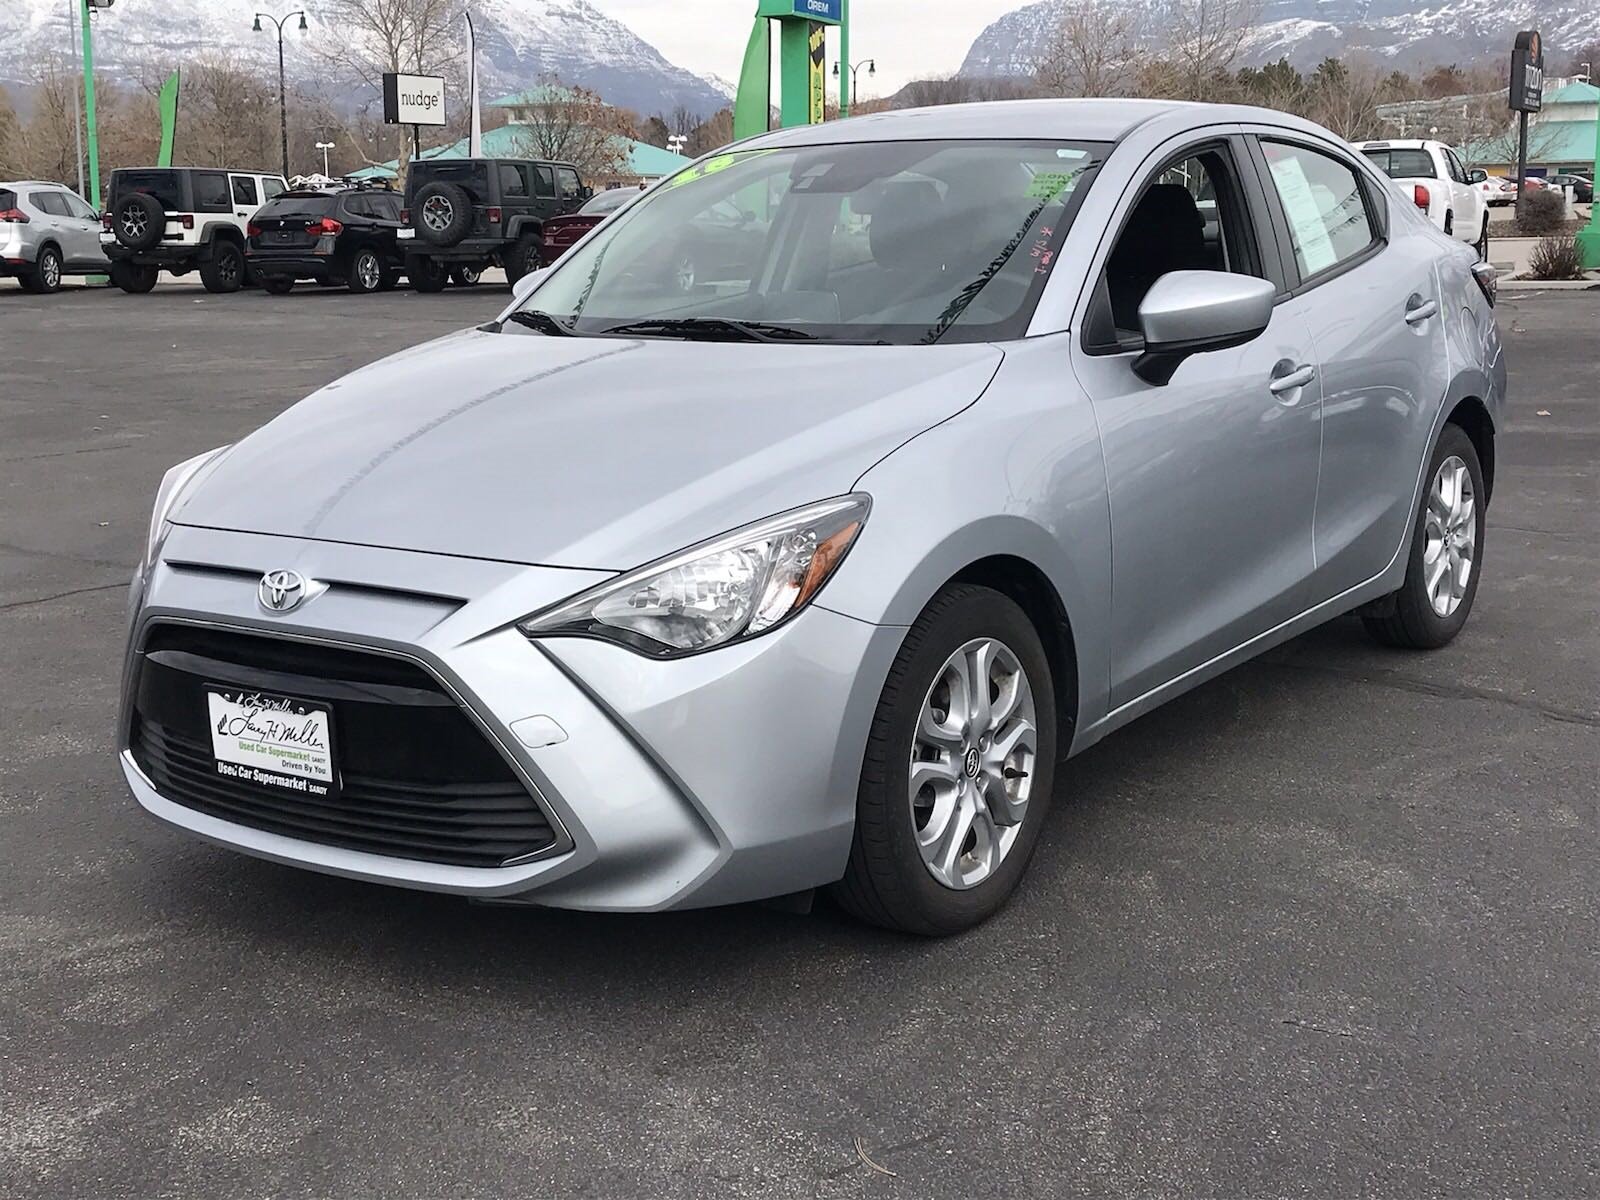 PreOwned 2018 Toyota Yaris iA 4dr Car in Sandy S5727